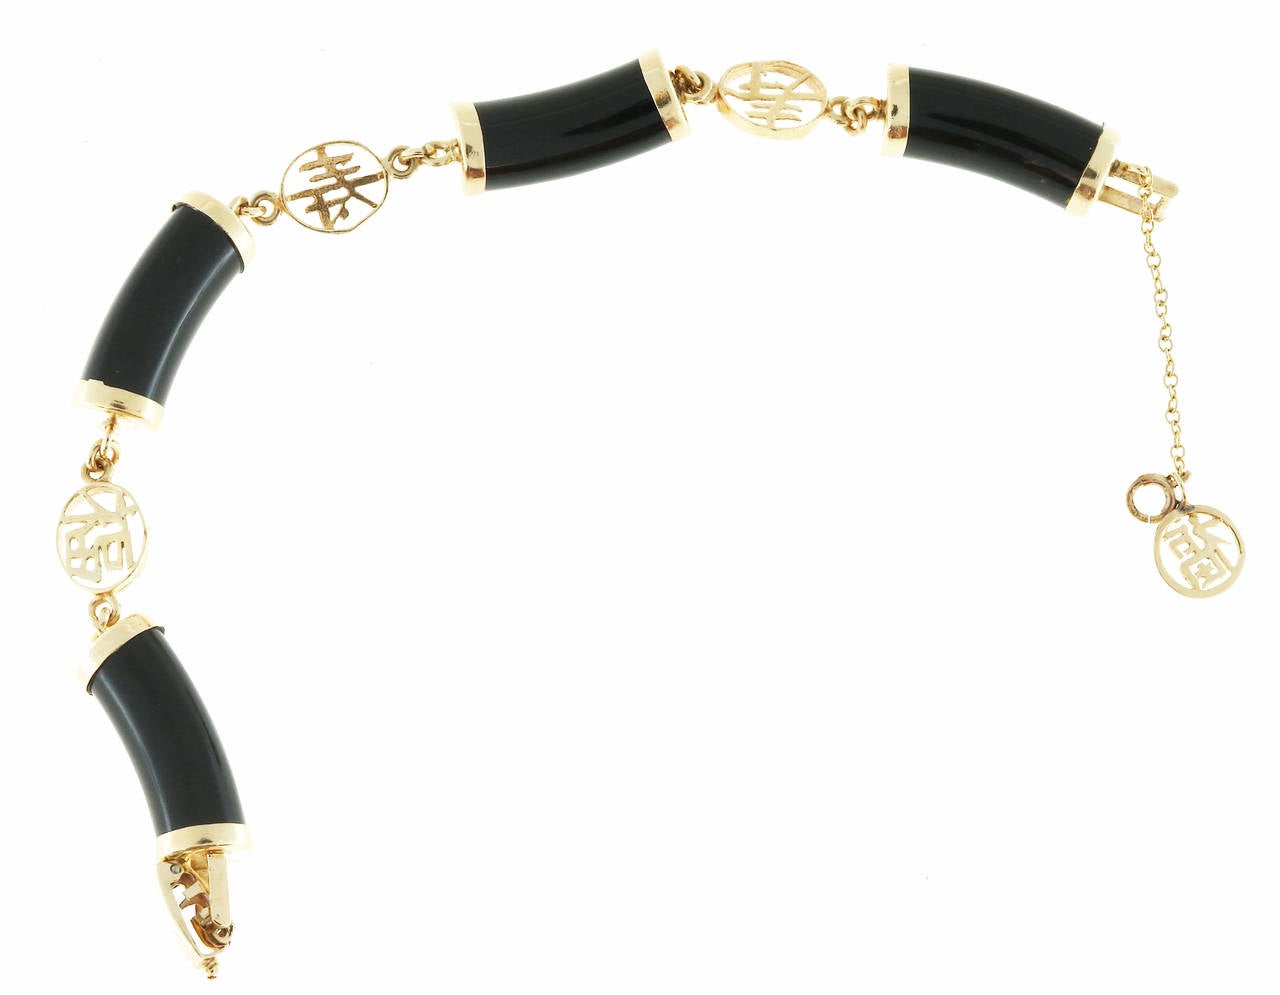 Natural black AGL certified Nephrite Jade and 14k yellow gold Chinese motif bracelet. 4 cylinders of well-polished black Jade are connected by cut out oval links with Chinese characters. Secure box catch and a safety chain.

4 AGL certified